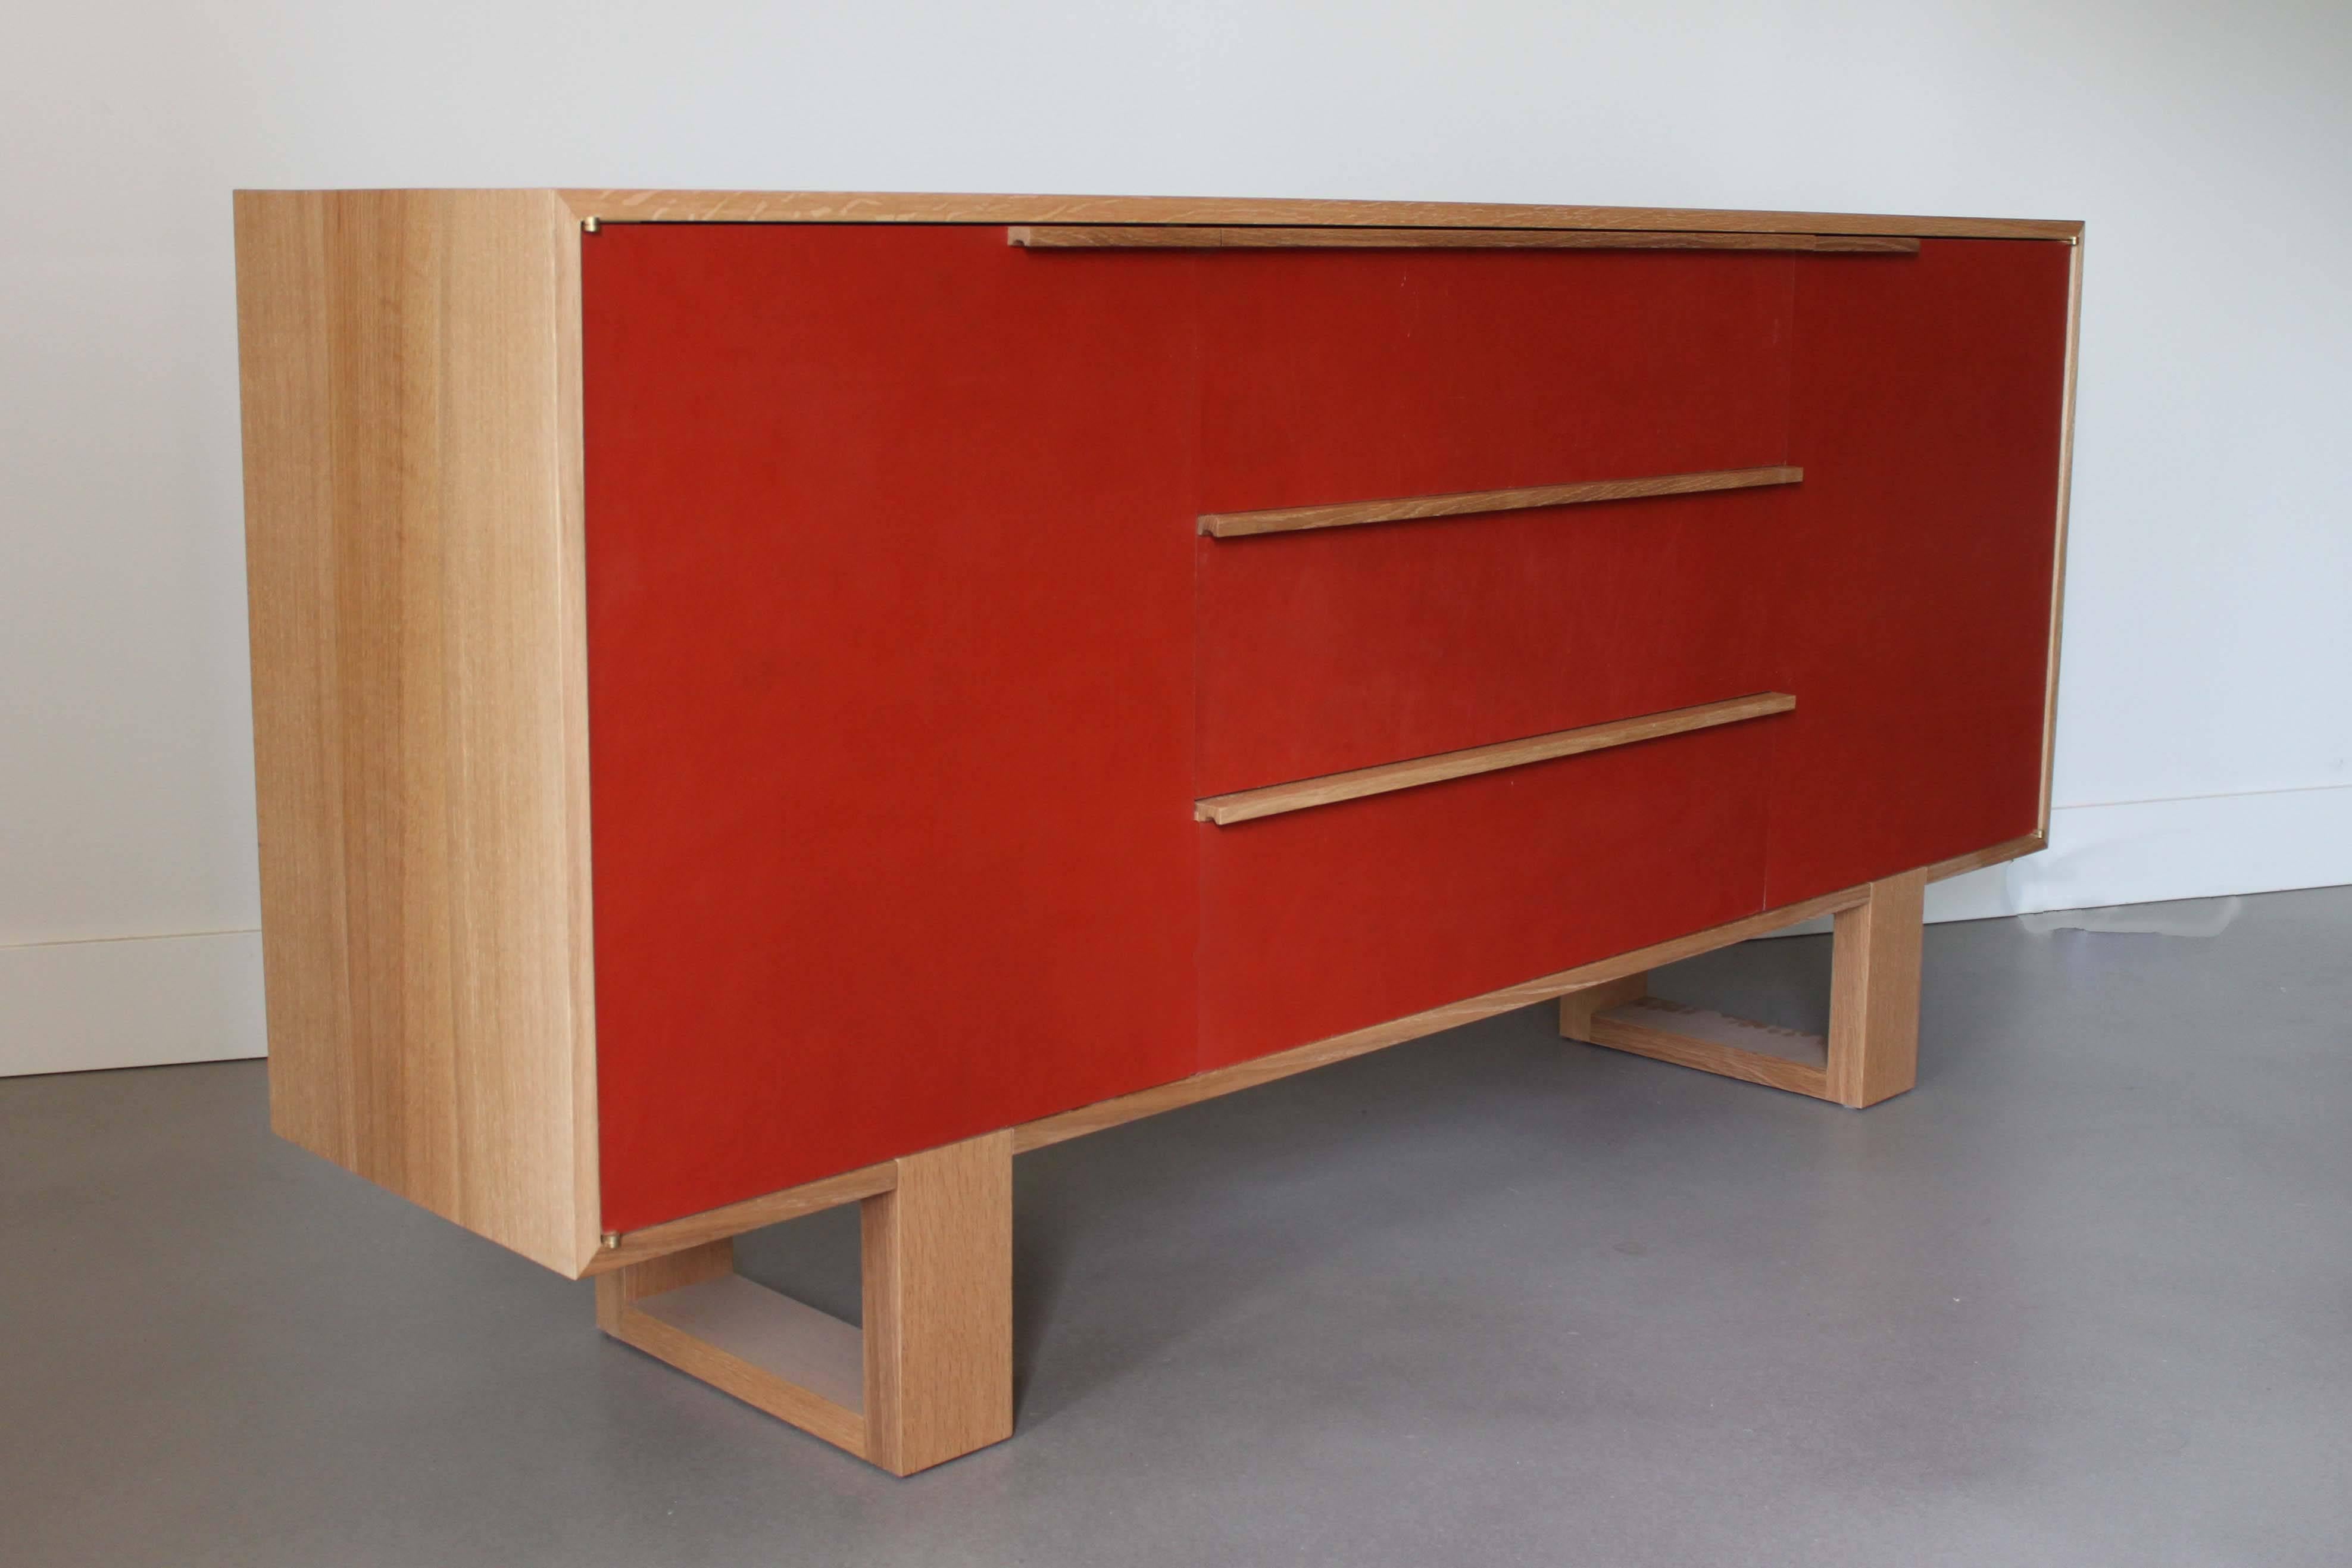 Solid white oak and deep orange leather clad credenza by Canadian furniture designer and maker Kate Duncan. Part of her 